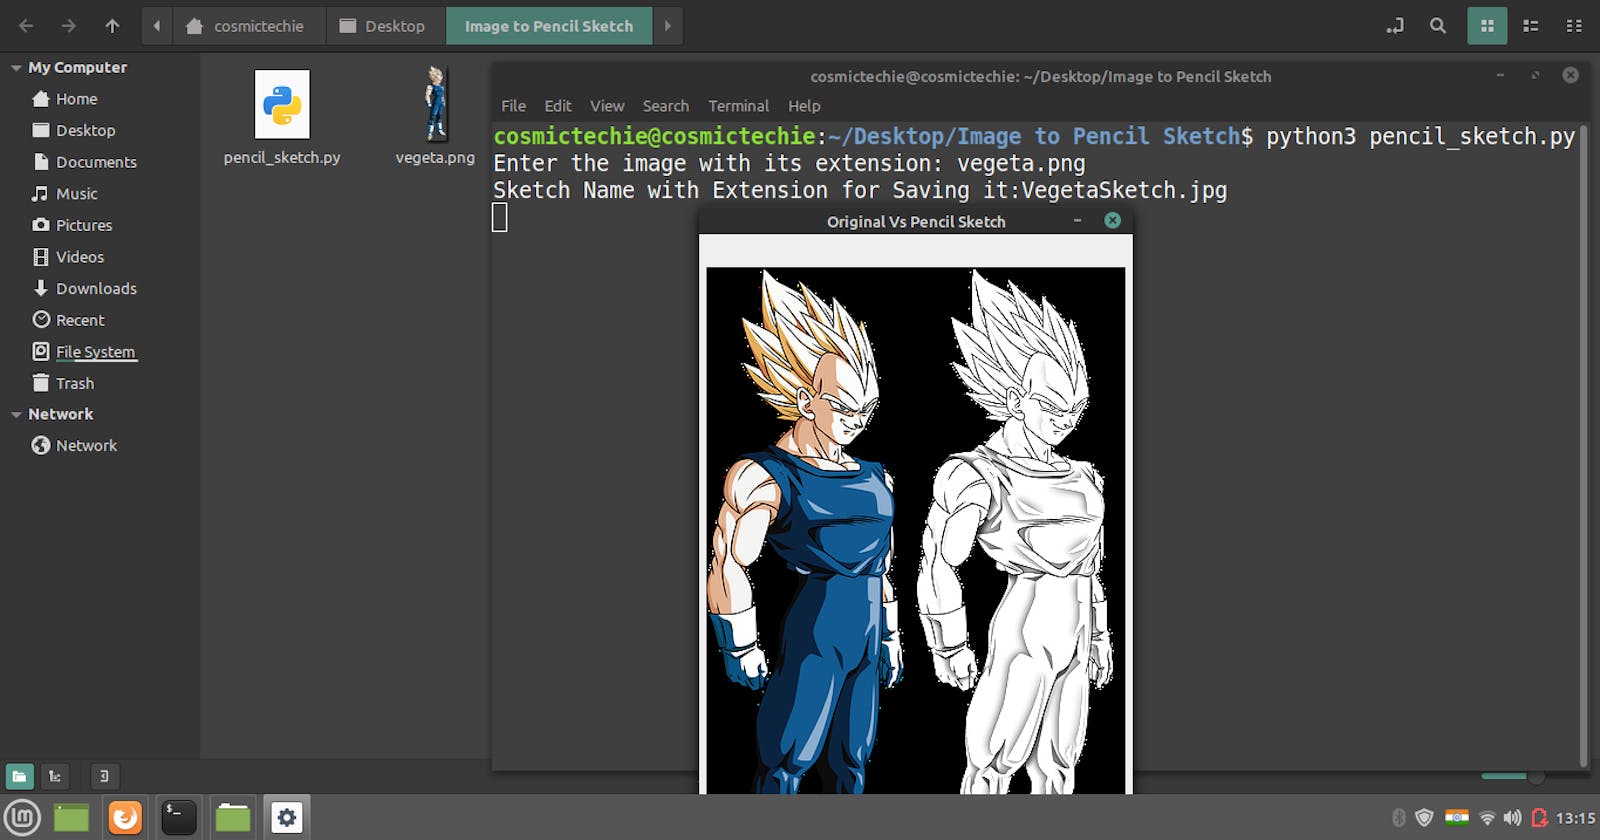 Image to Pencil Sketch using Python and OpenCV